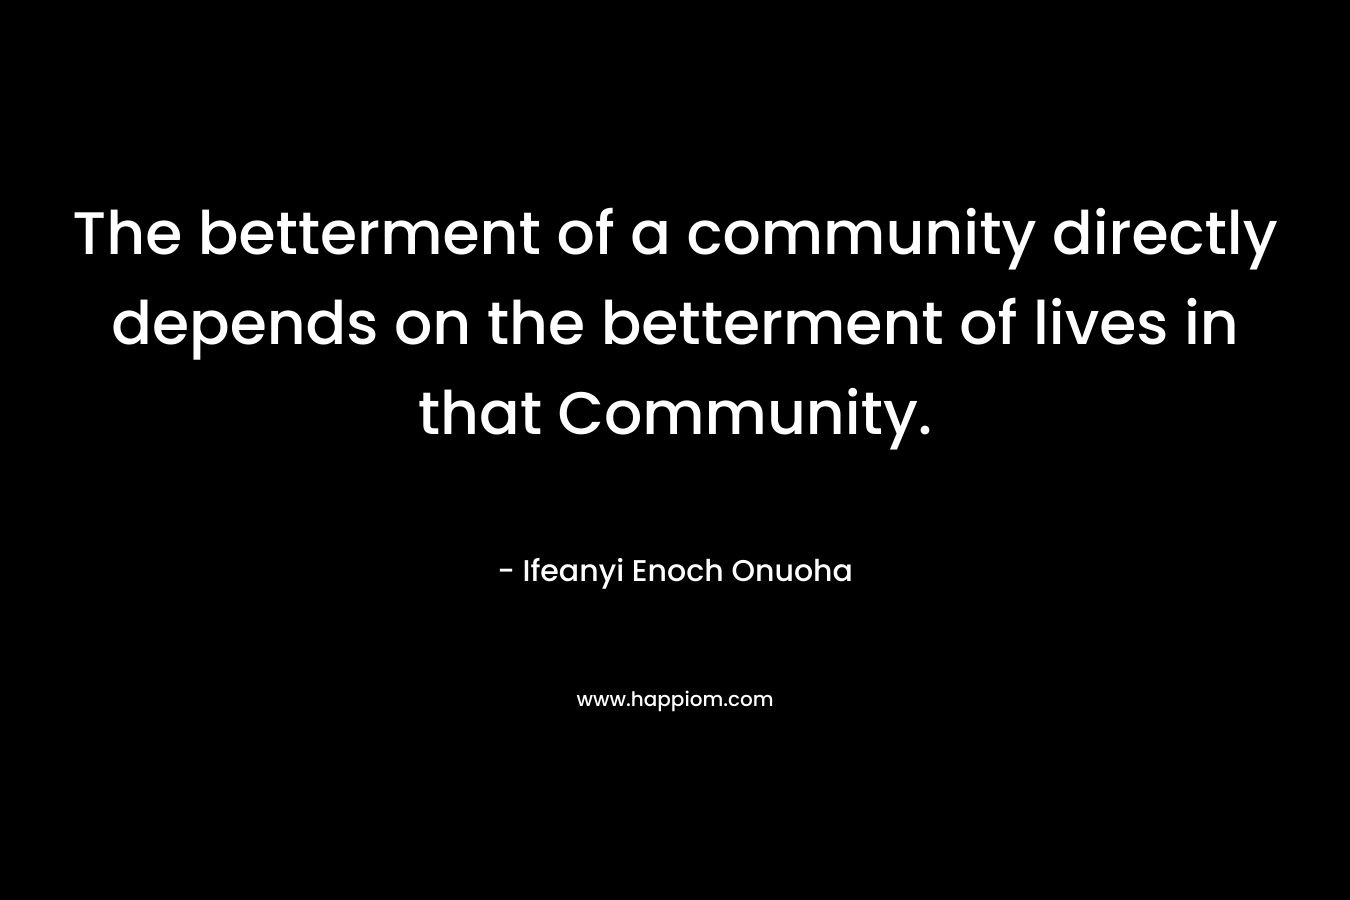 The betterment of a community directly depends on the betterment of lives in that Community. – Ifeanyi Enoch Onuoha